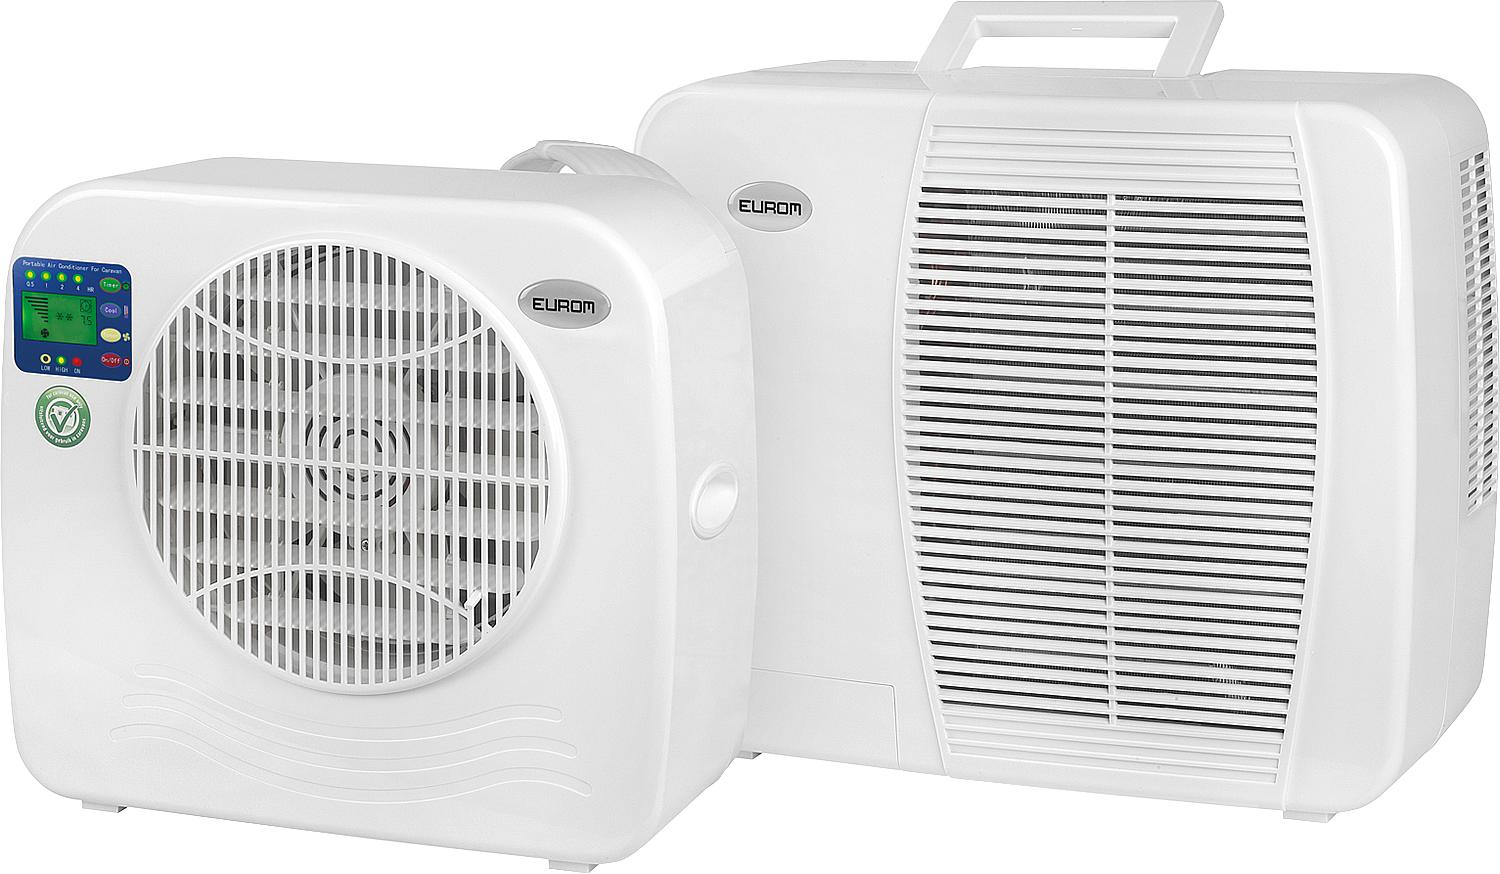 asdec life ® Eurom air conditioner AC2401 for caravans, mobile homes, camping, boats, buses, campers, caravans, mobile homes, B